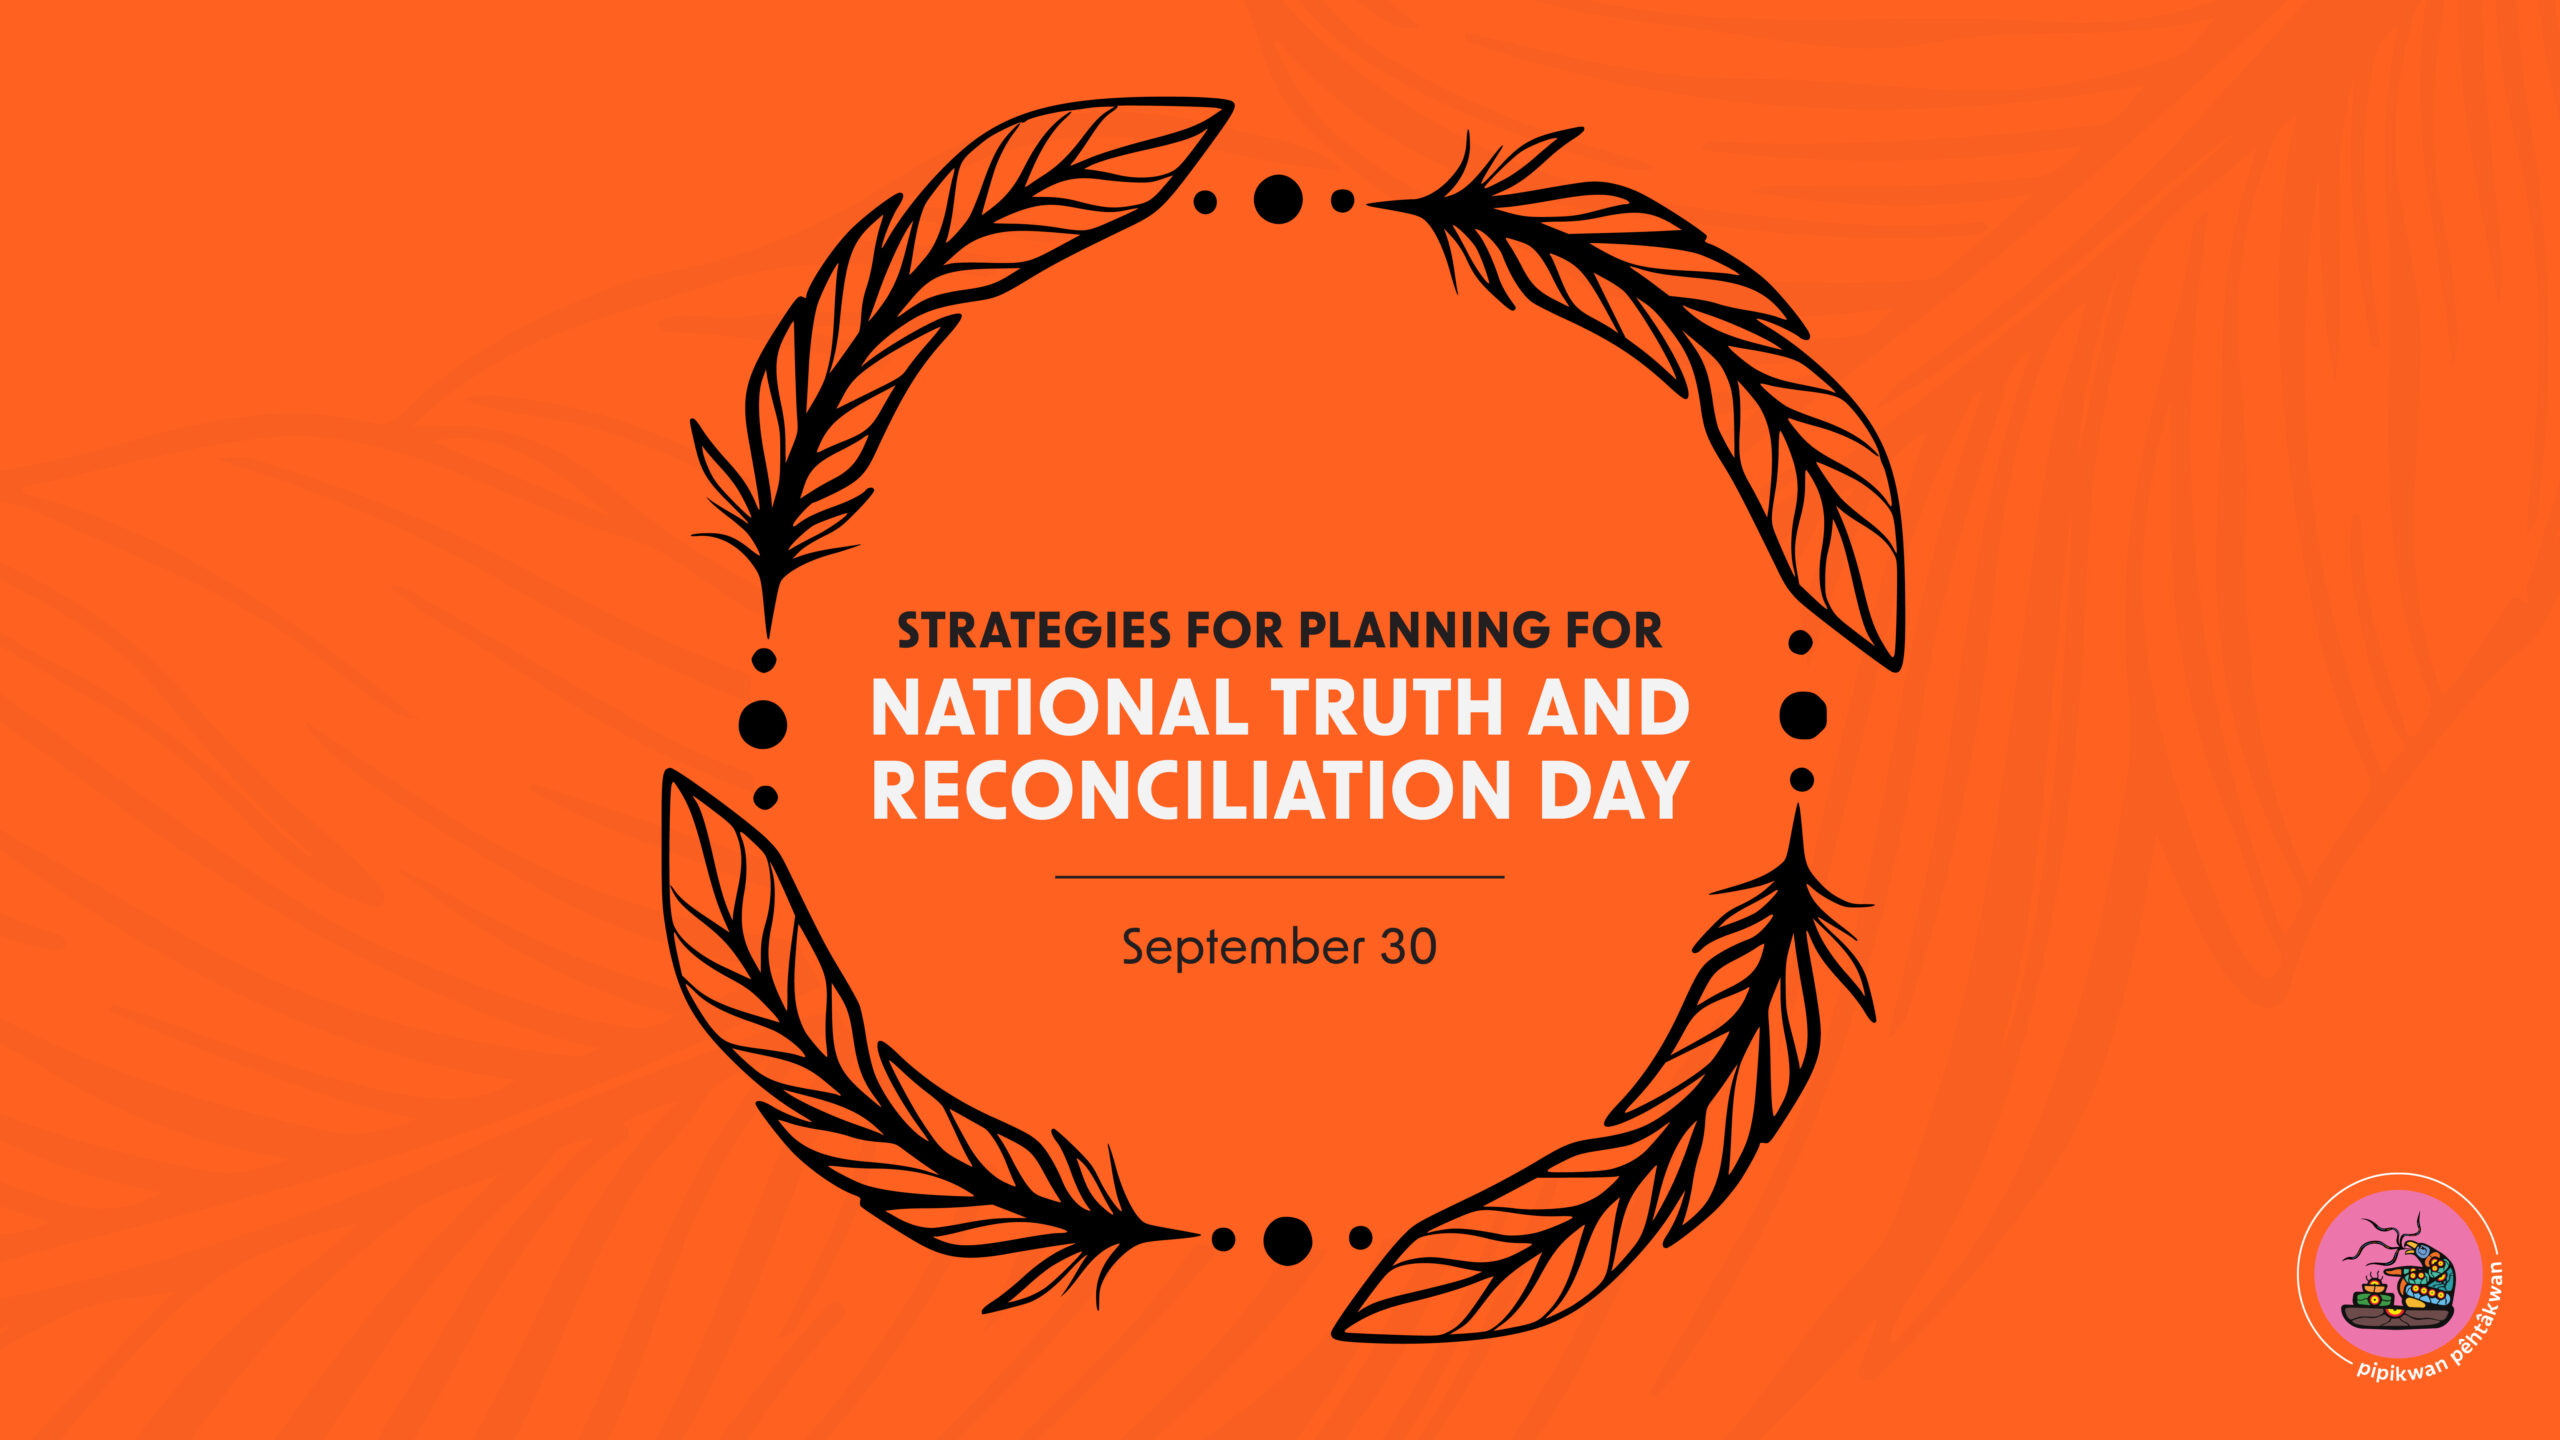 Strategies for Planning for National Truth and Reconciliation Day